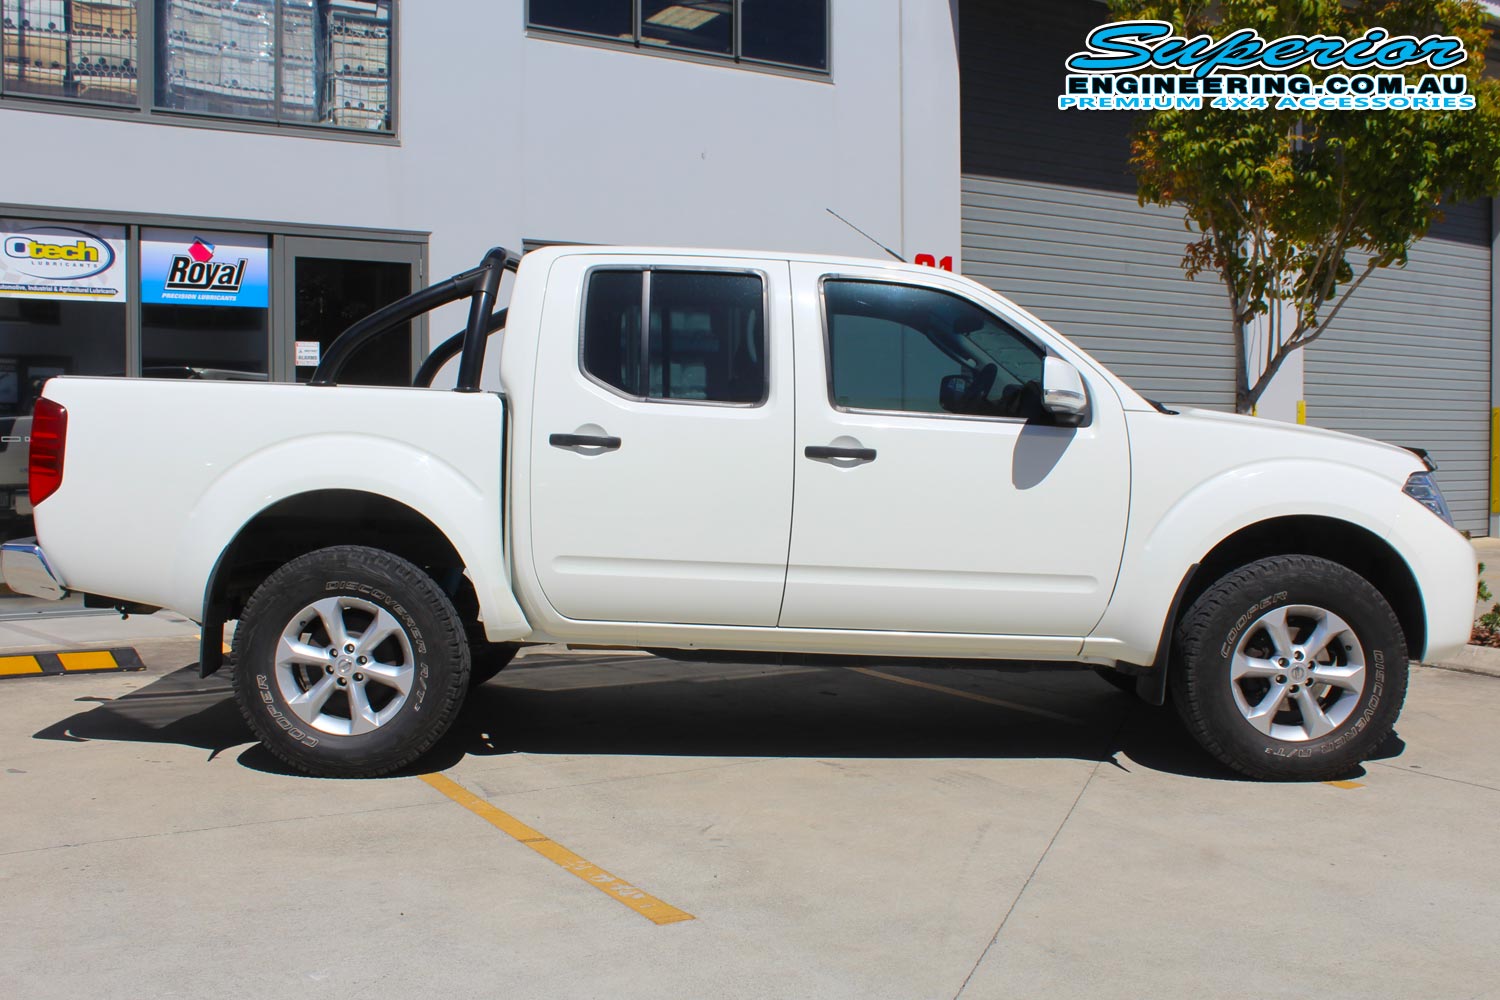 Right side view of a white Nissan Navara D40 dual cab after being fitted with a 2 inch Bilstein lift kit